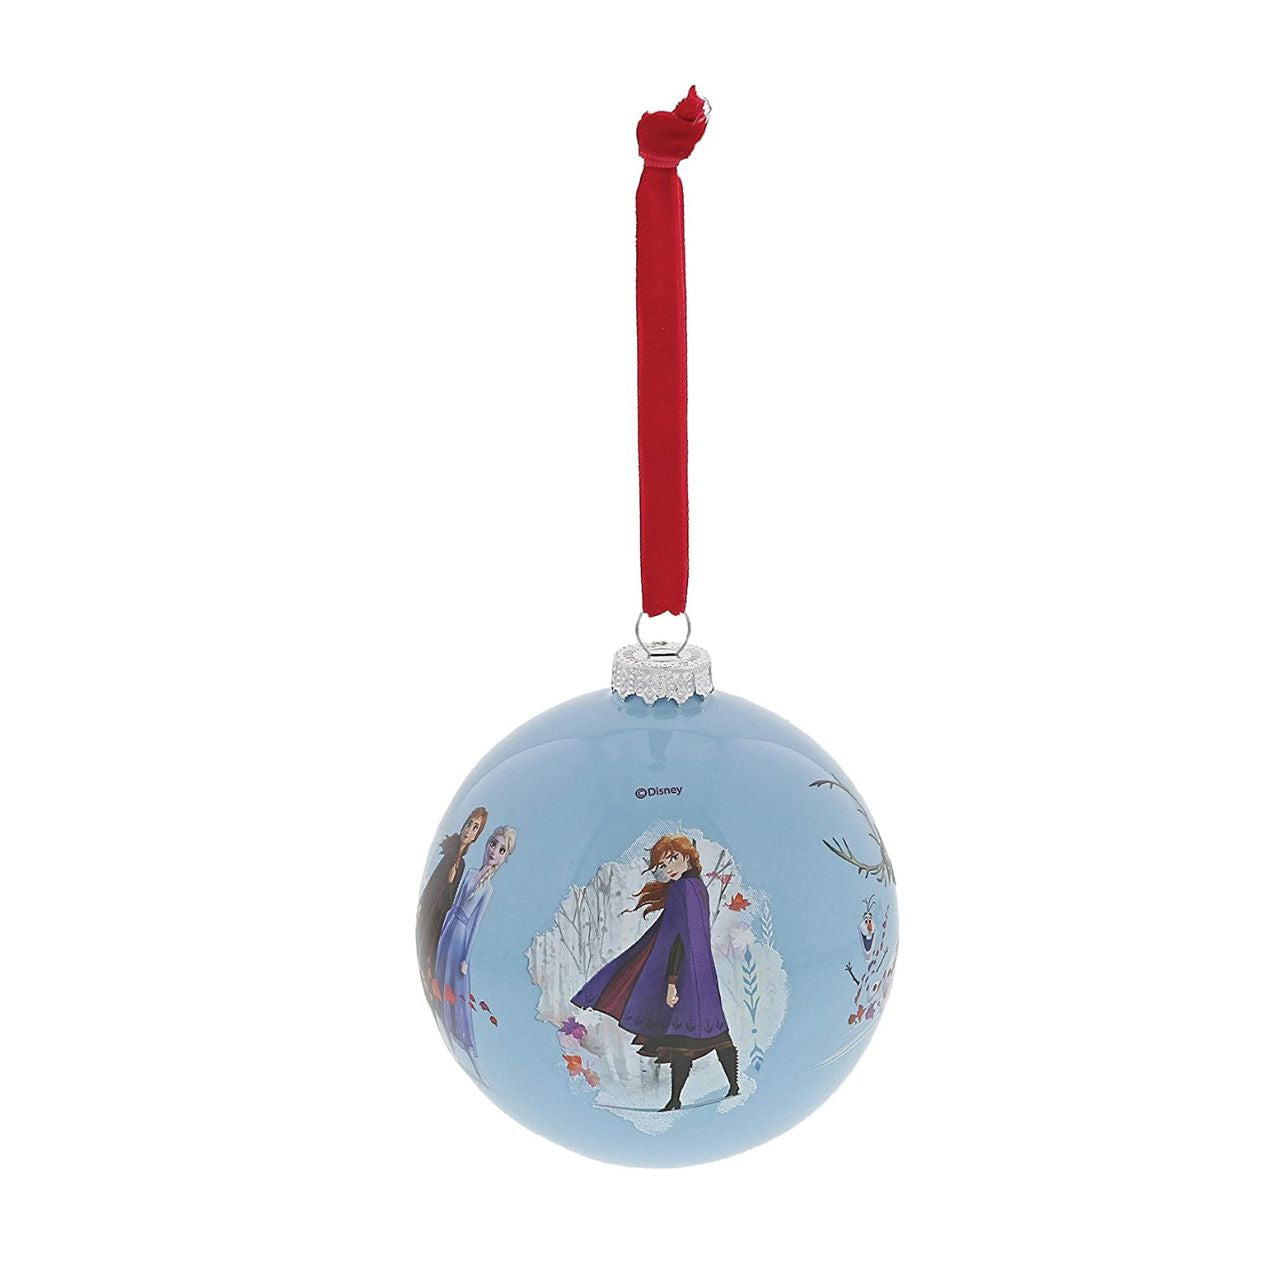 Disney Christmas Bauble Frozen Seek the Truth  Elsa and Anna are joined by the lovable Olaf in their next adventure in this icy blue glass bauble. This Frozen treasured keepsake would make a lovely unique gift for a friend, or a self-purchase to brighten up the home. Presented in a branded window box.